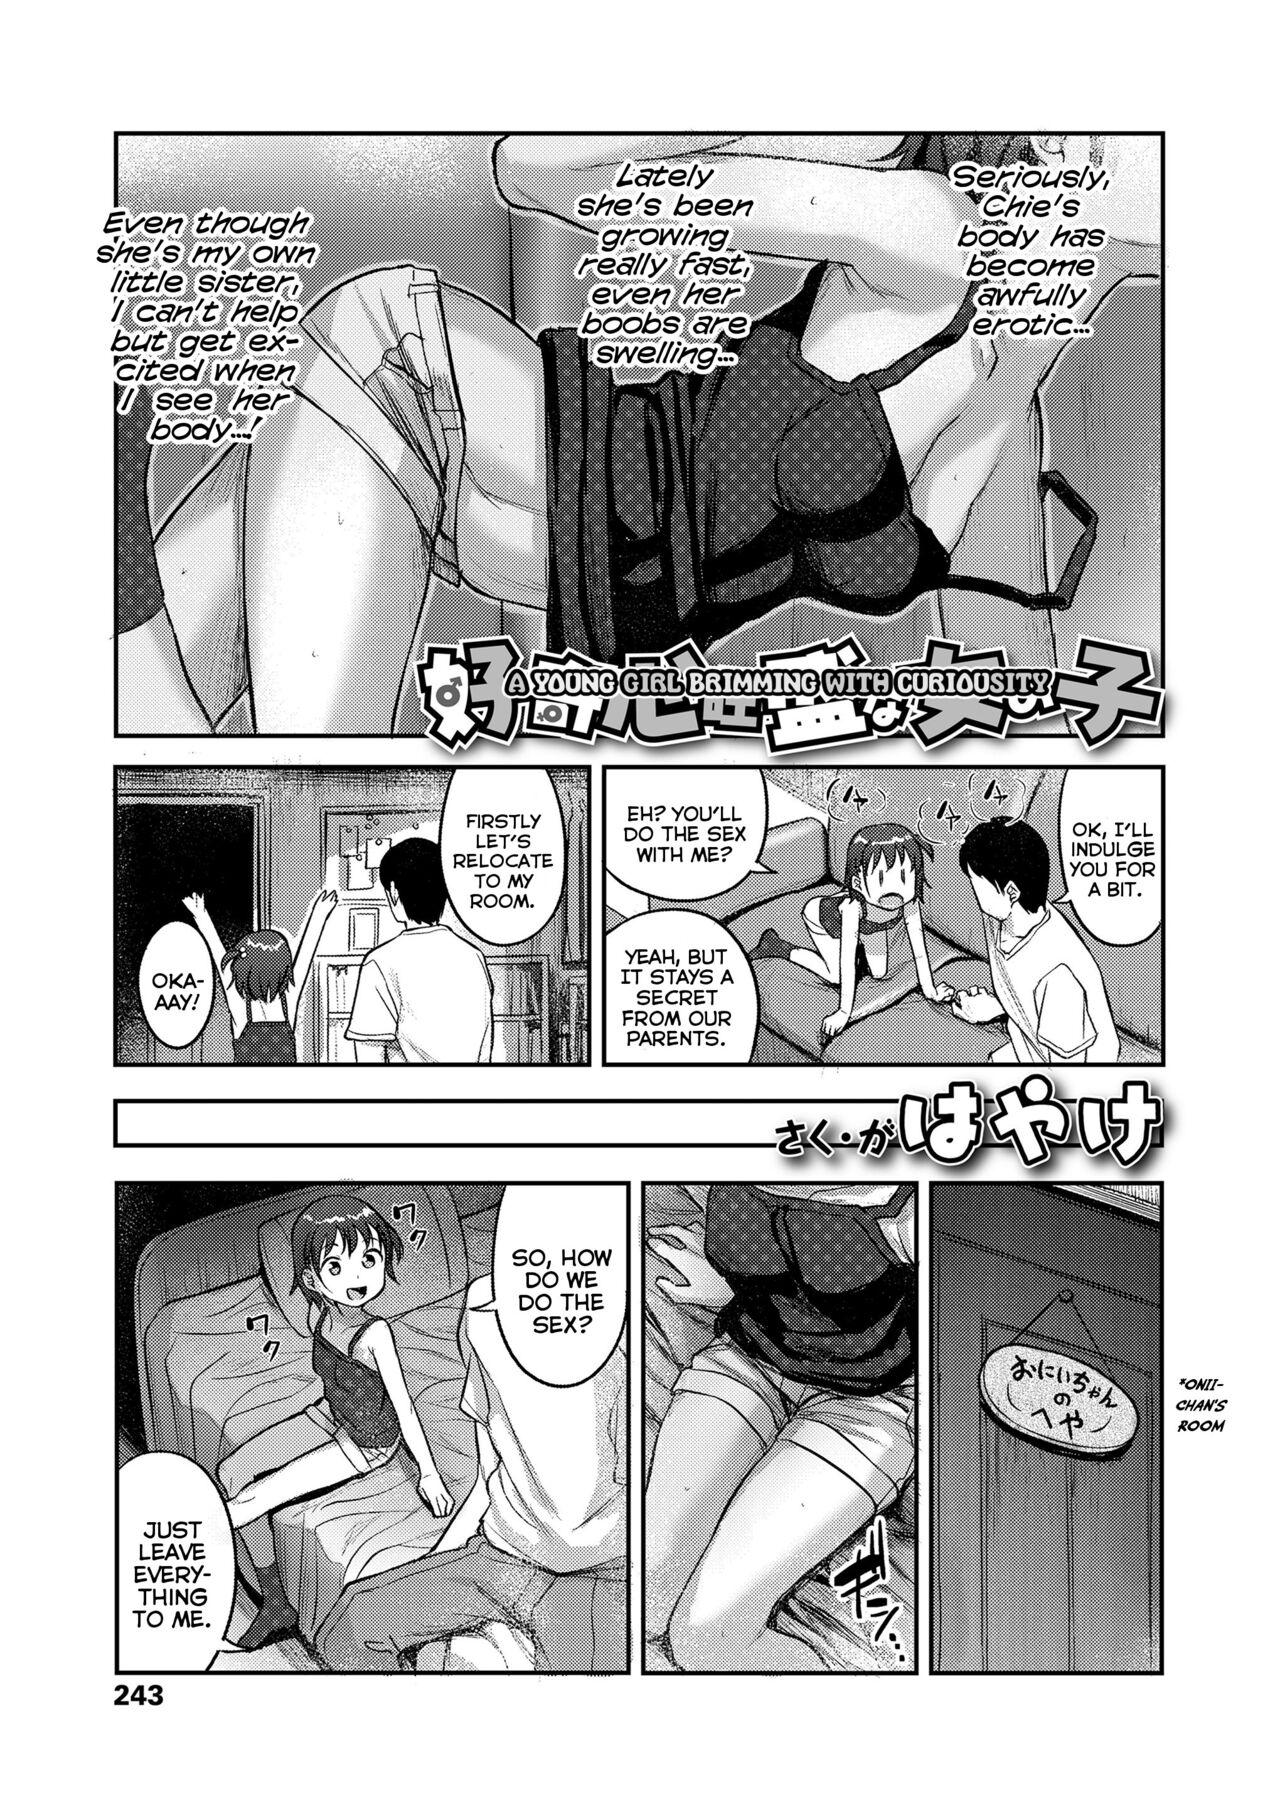 Nerd Koukishin Ousei na Onnanoko | A Young Girl Brimming With Curiousity Amateur Sex - Page 3